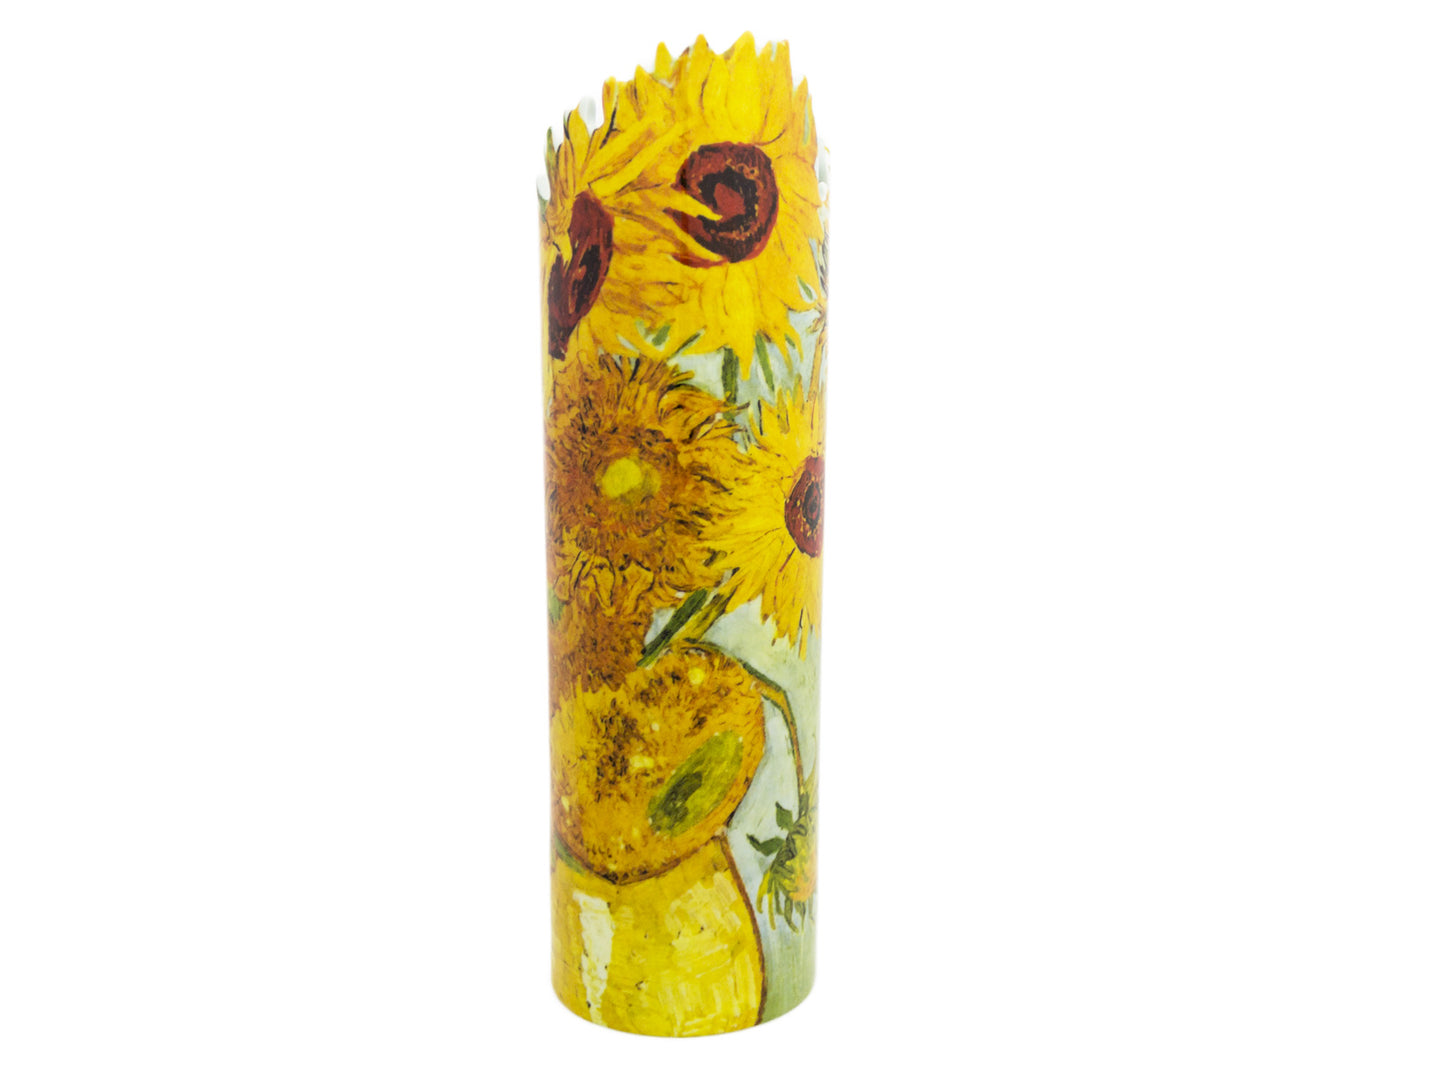 A porcelain vase with Vincent Van Gogh's iconic Sunflowers painting laid into it, with the top edge of the vase following the shape of the flowers